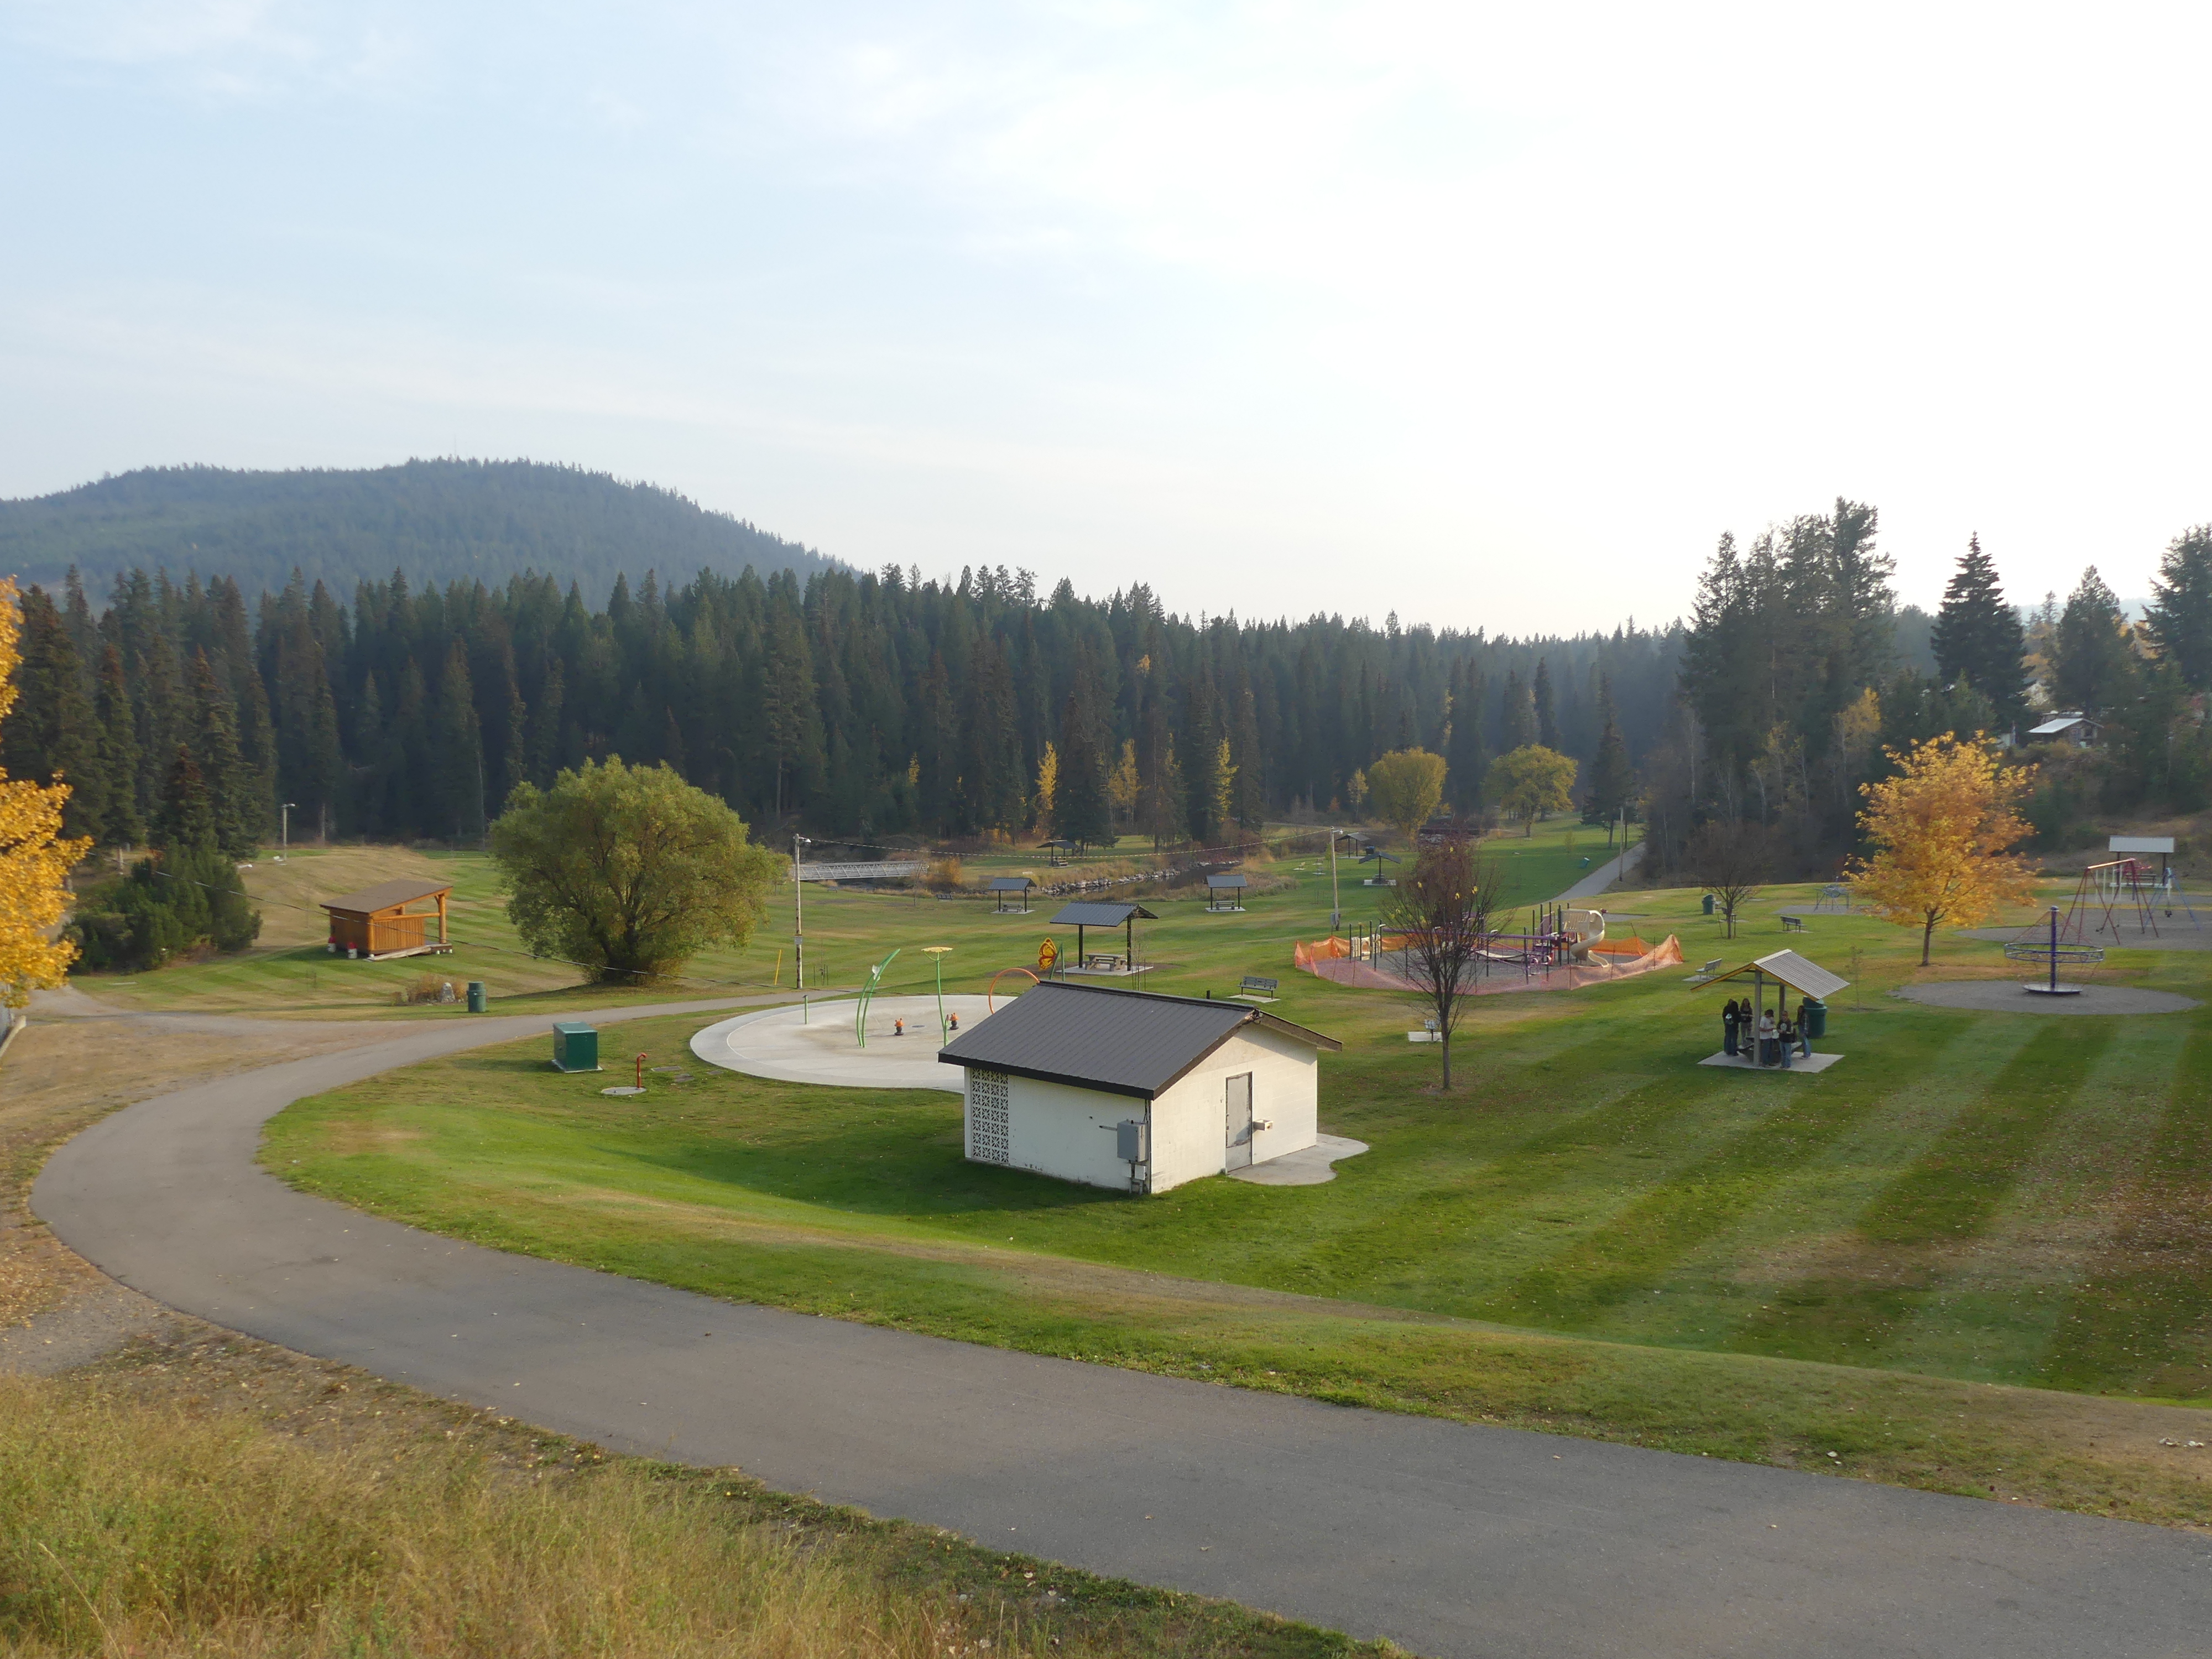 A park with green grass, trees and a mountain in the background, with playgrounds, washroom facilities and sports fields.